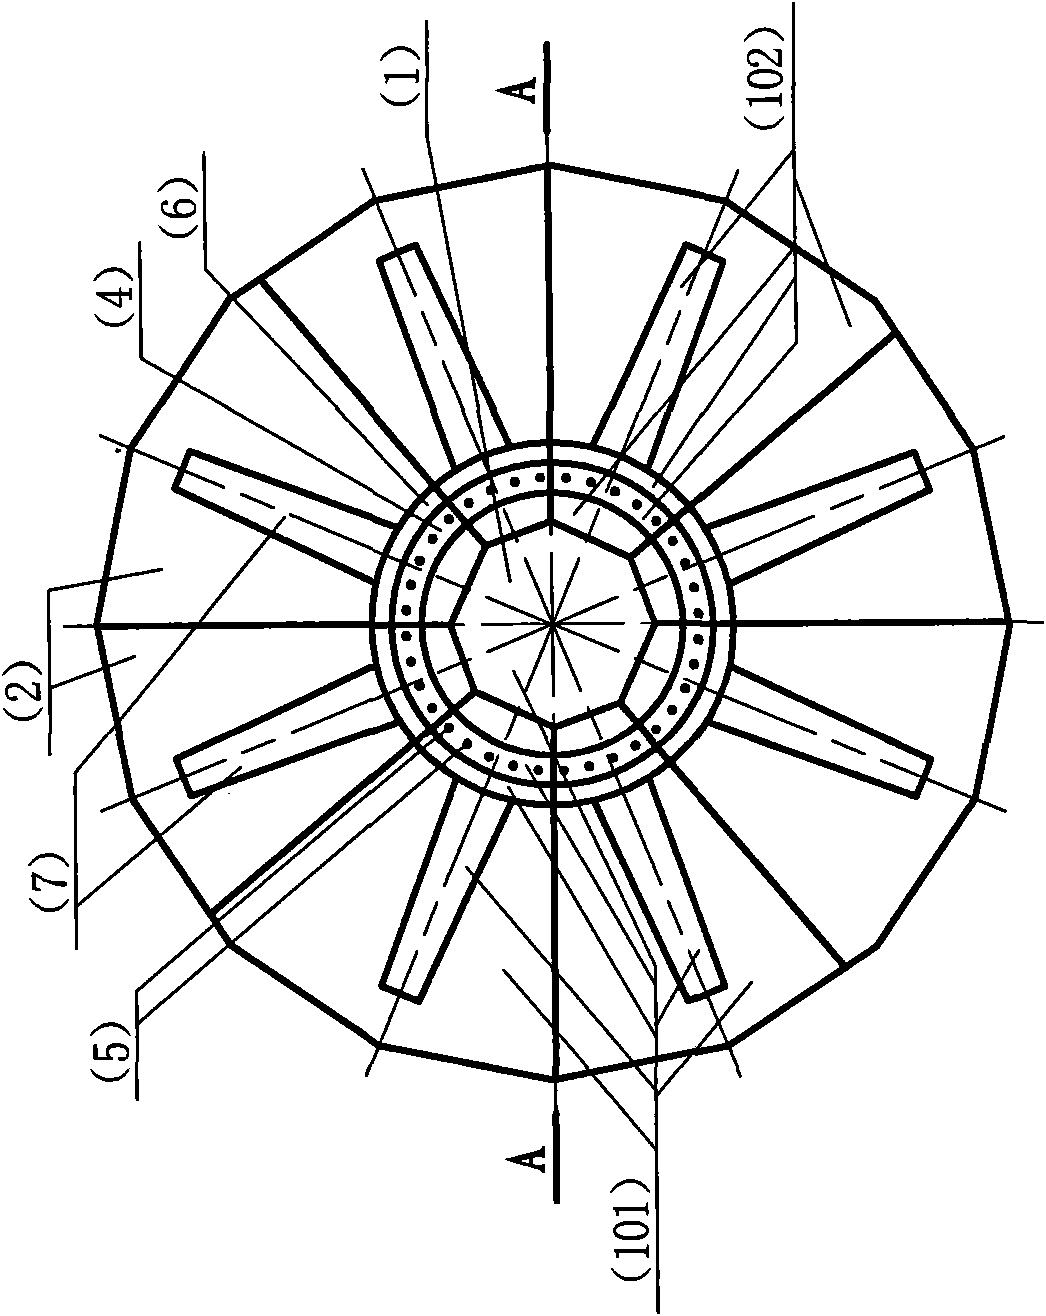 Combination foundation of large-scale tower mast type mechanical equipment